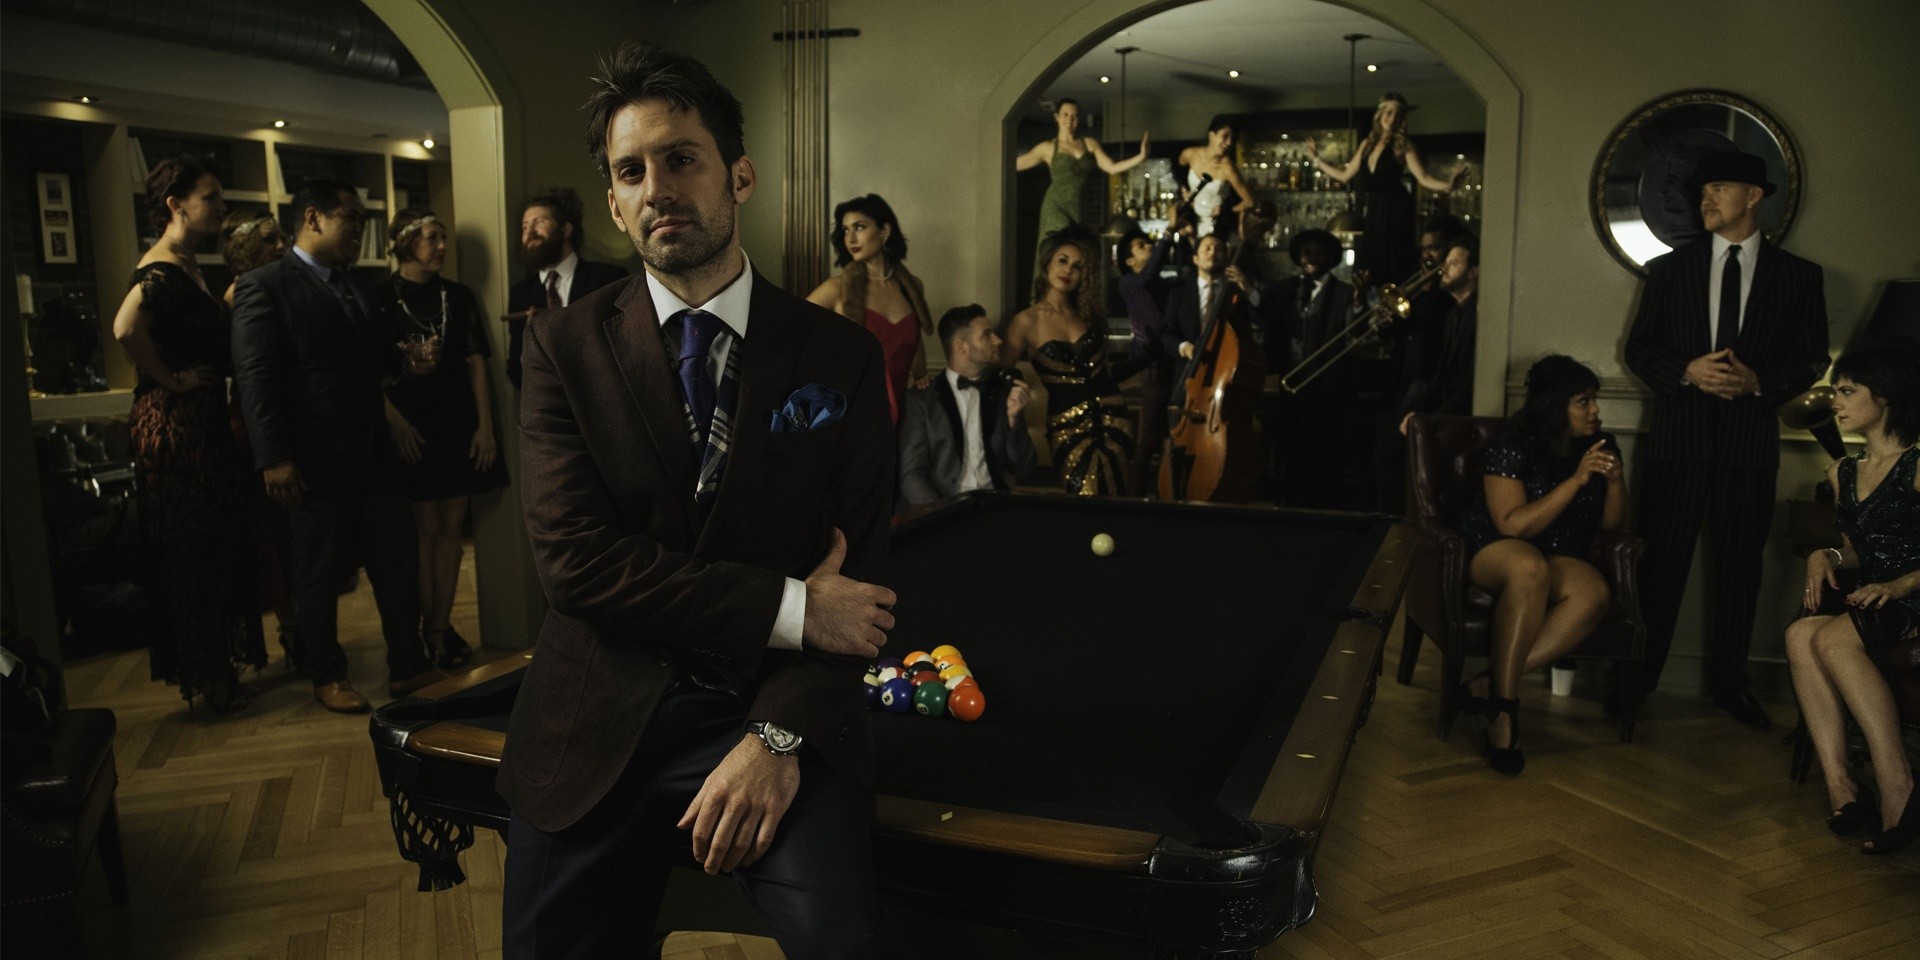 Musical collective Postmodern Jukebox is returning to Singapore